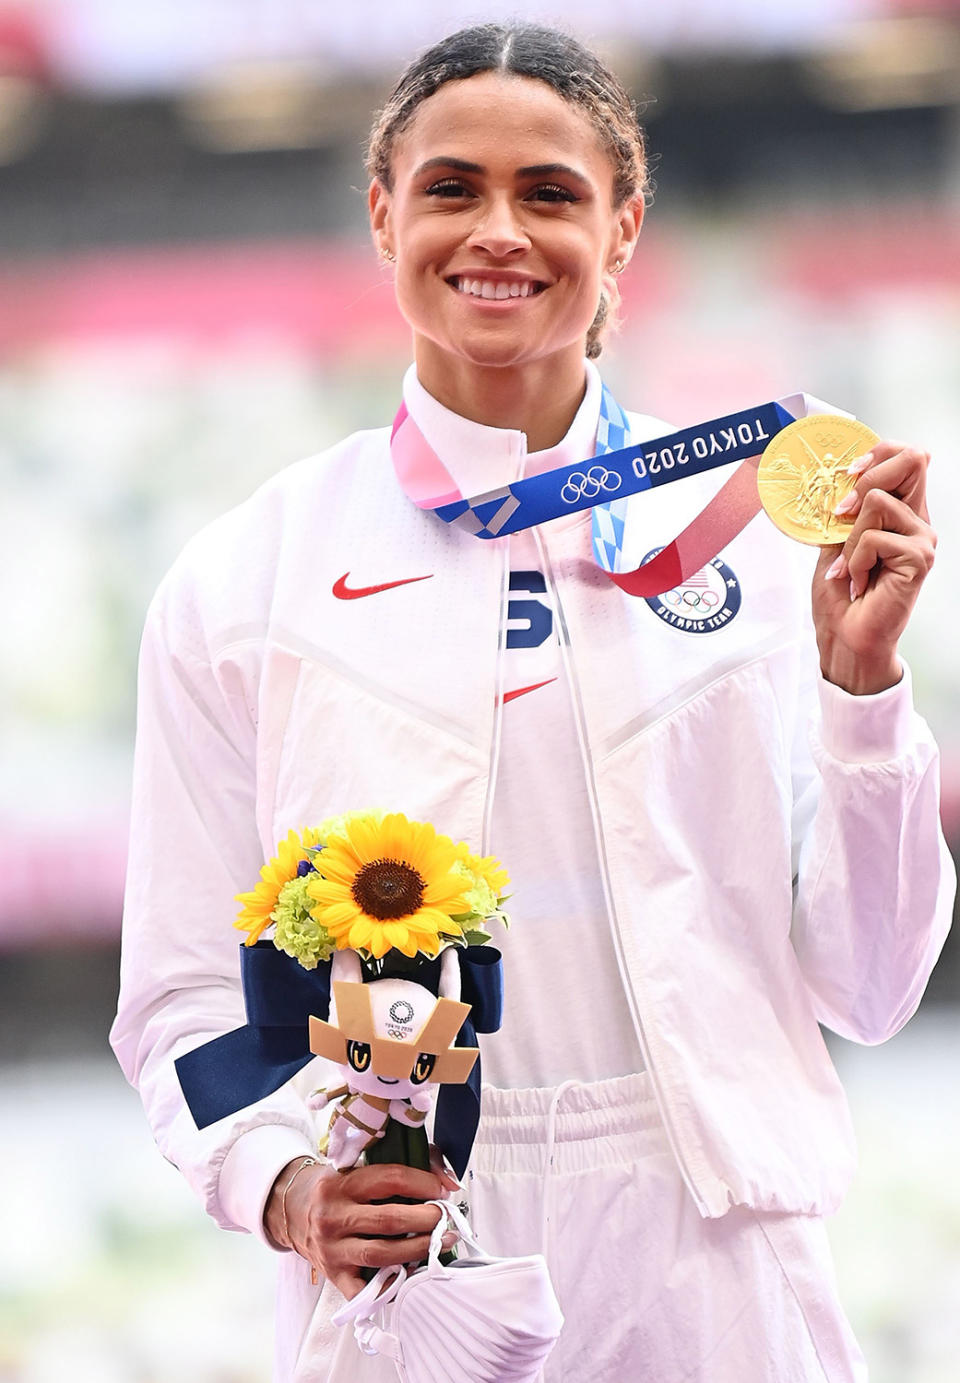 <p>Biography: 21 years old</p> <p>Event: Women's 400m hurdles</p> <p>Quote: "I just knew that I had to be patient and trust that I could feel strong enough and come off 10 and give it everything I have."</p>